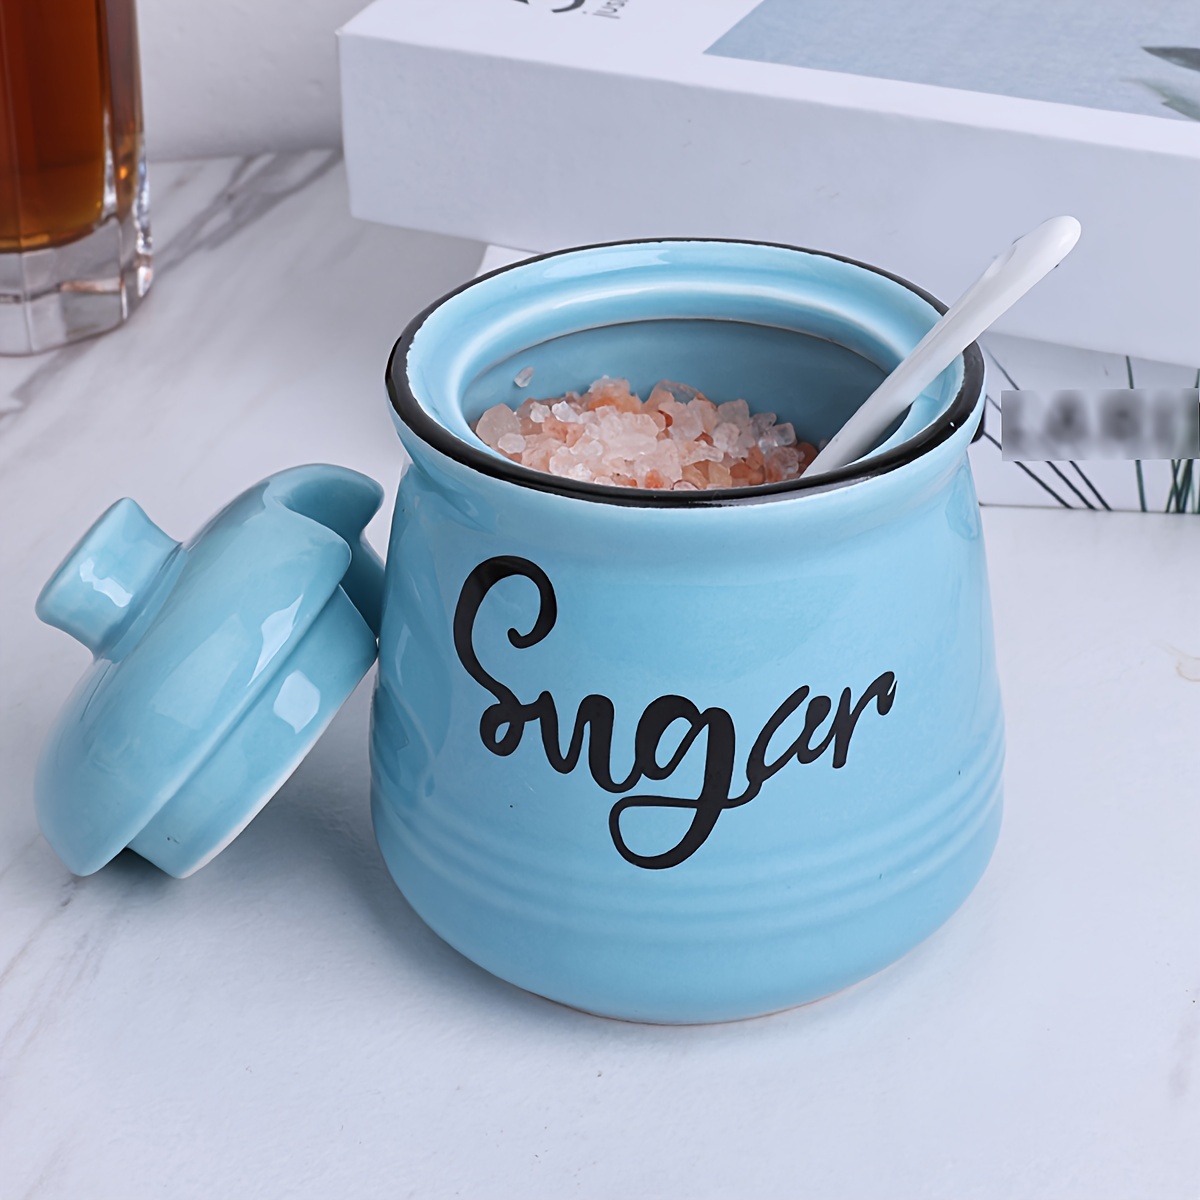 Vermida Sugar Bowl with Lids and Spoons,Ceramic Sugar Jar with Spoon and  Tray,Porcelain Sugar Container with Labels for Kitchen,Sugar Holder for